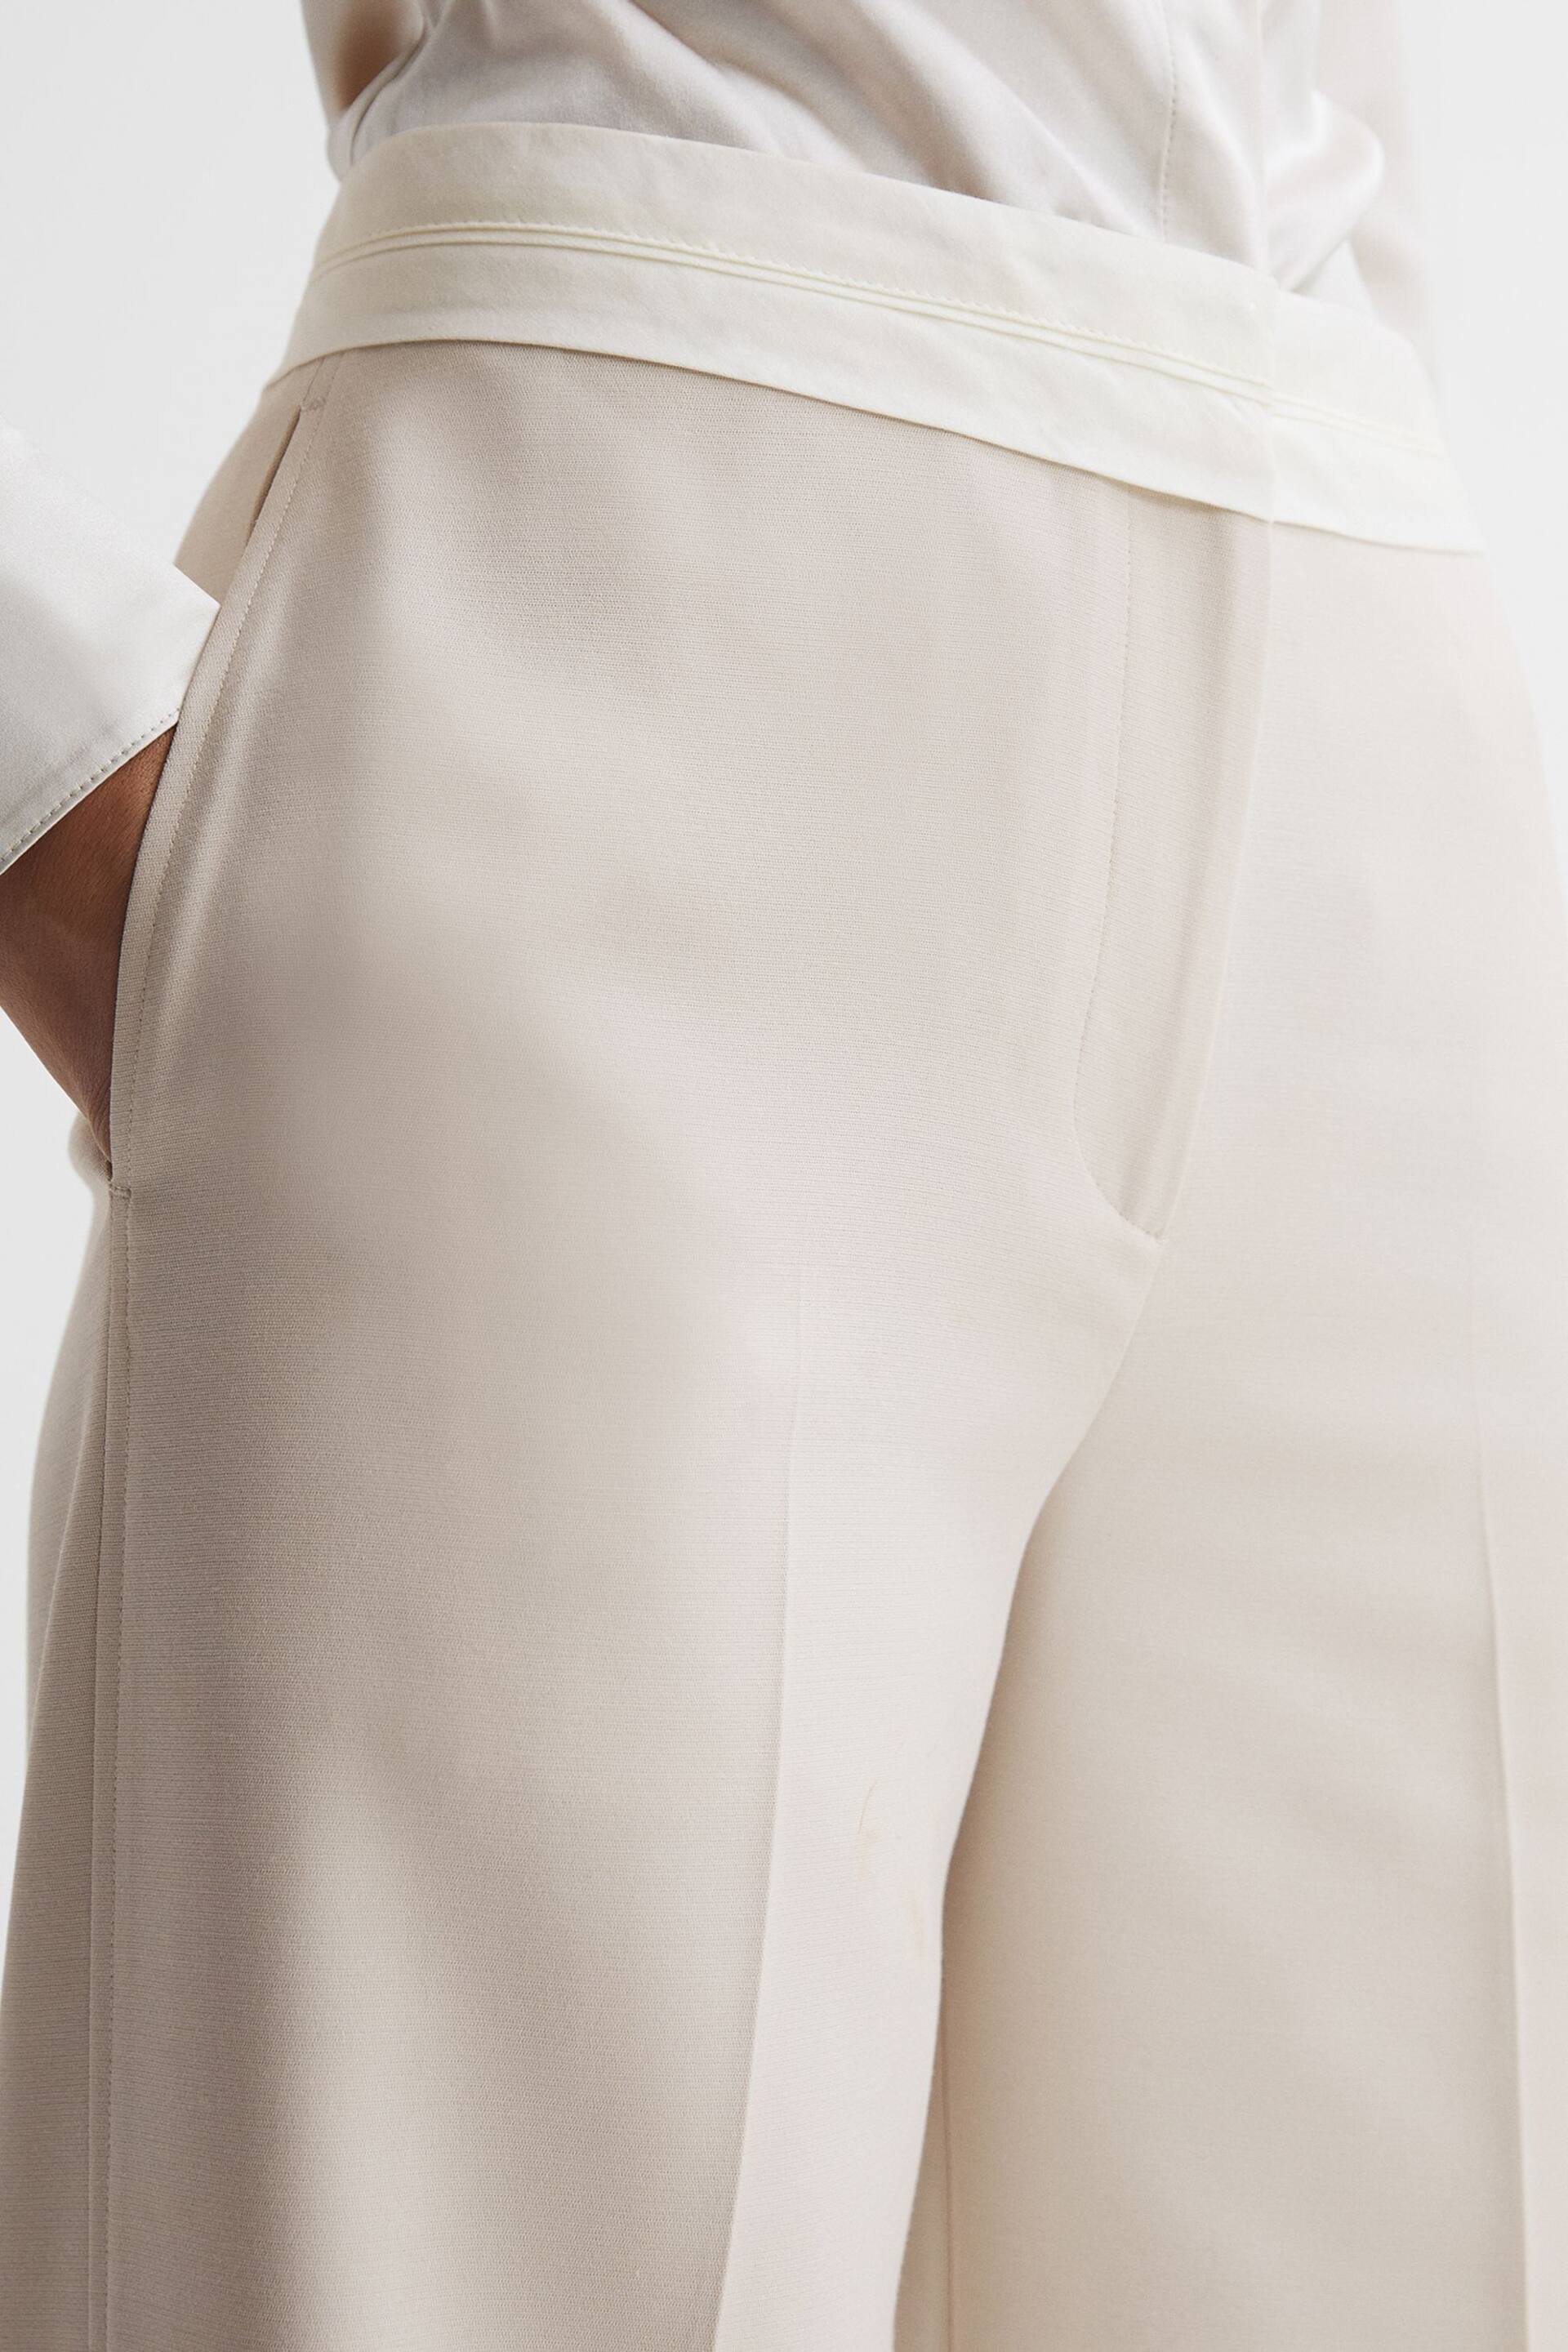 Reiss Neutral Maya Mid Rise Contrast Wide Leg Suit Trousers - Image 3 of 5